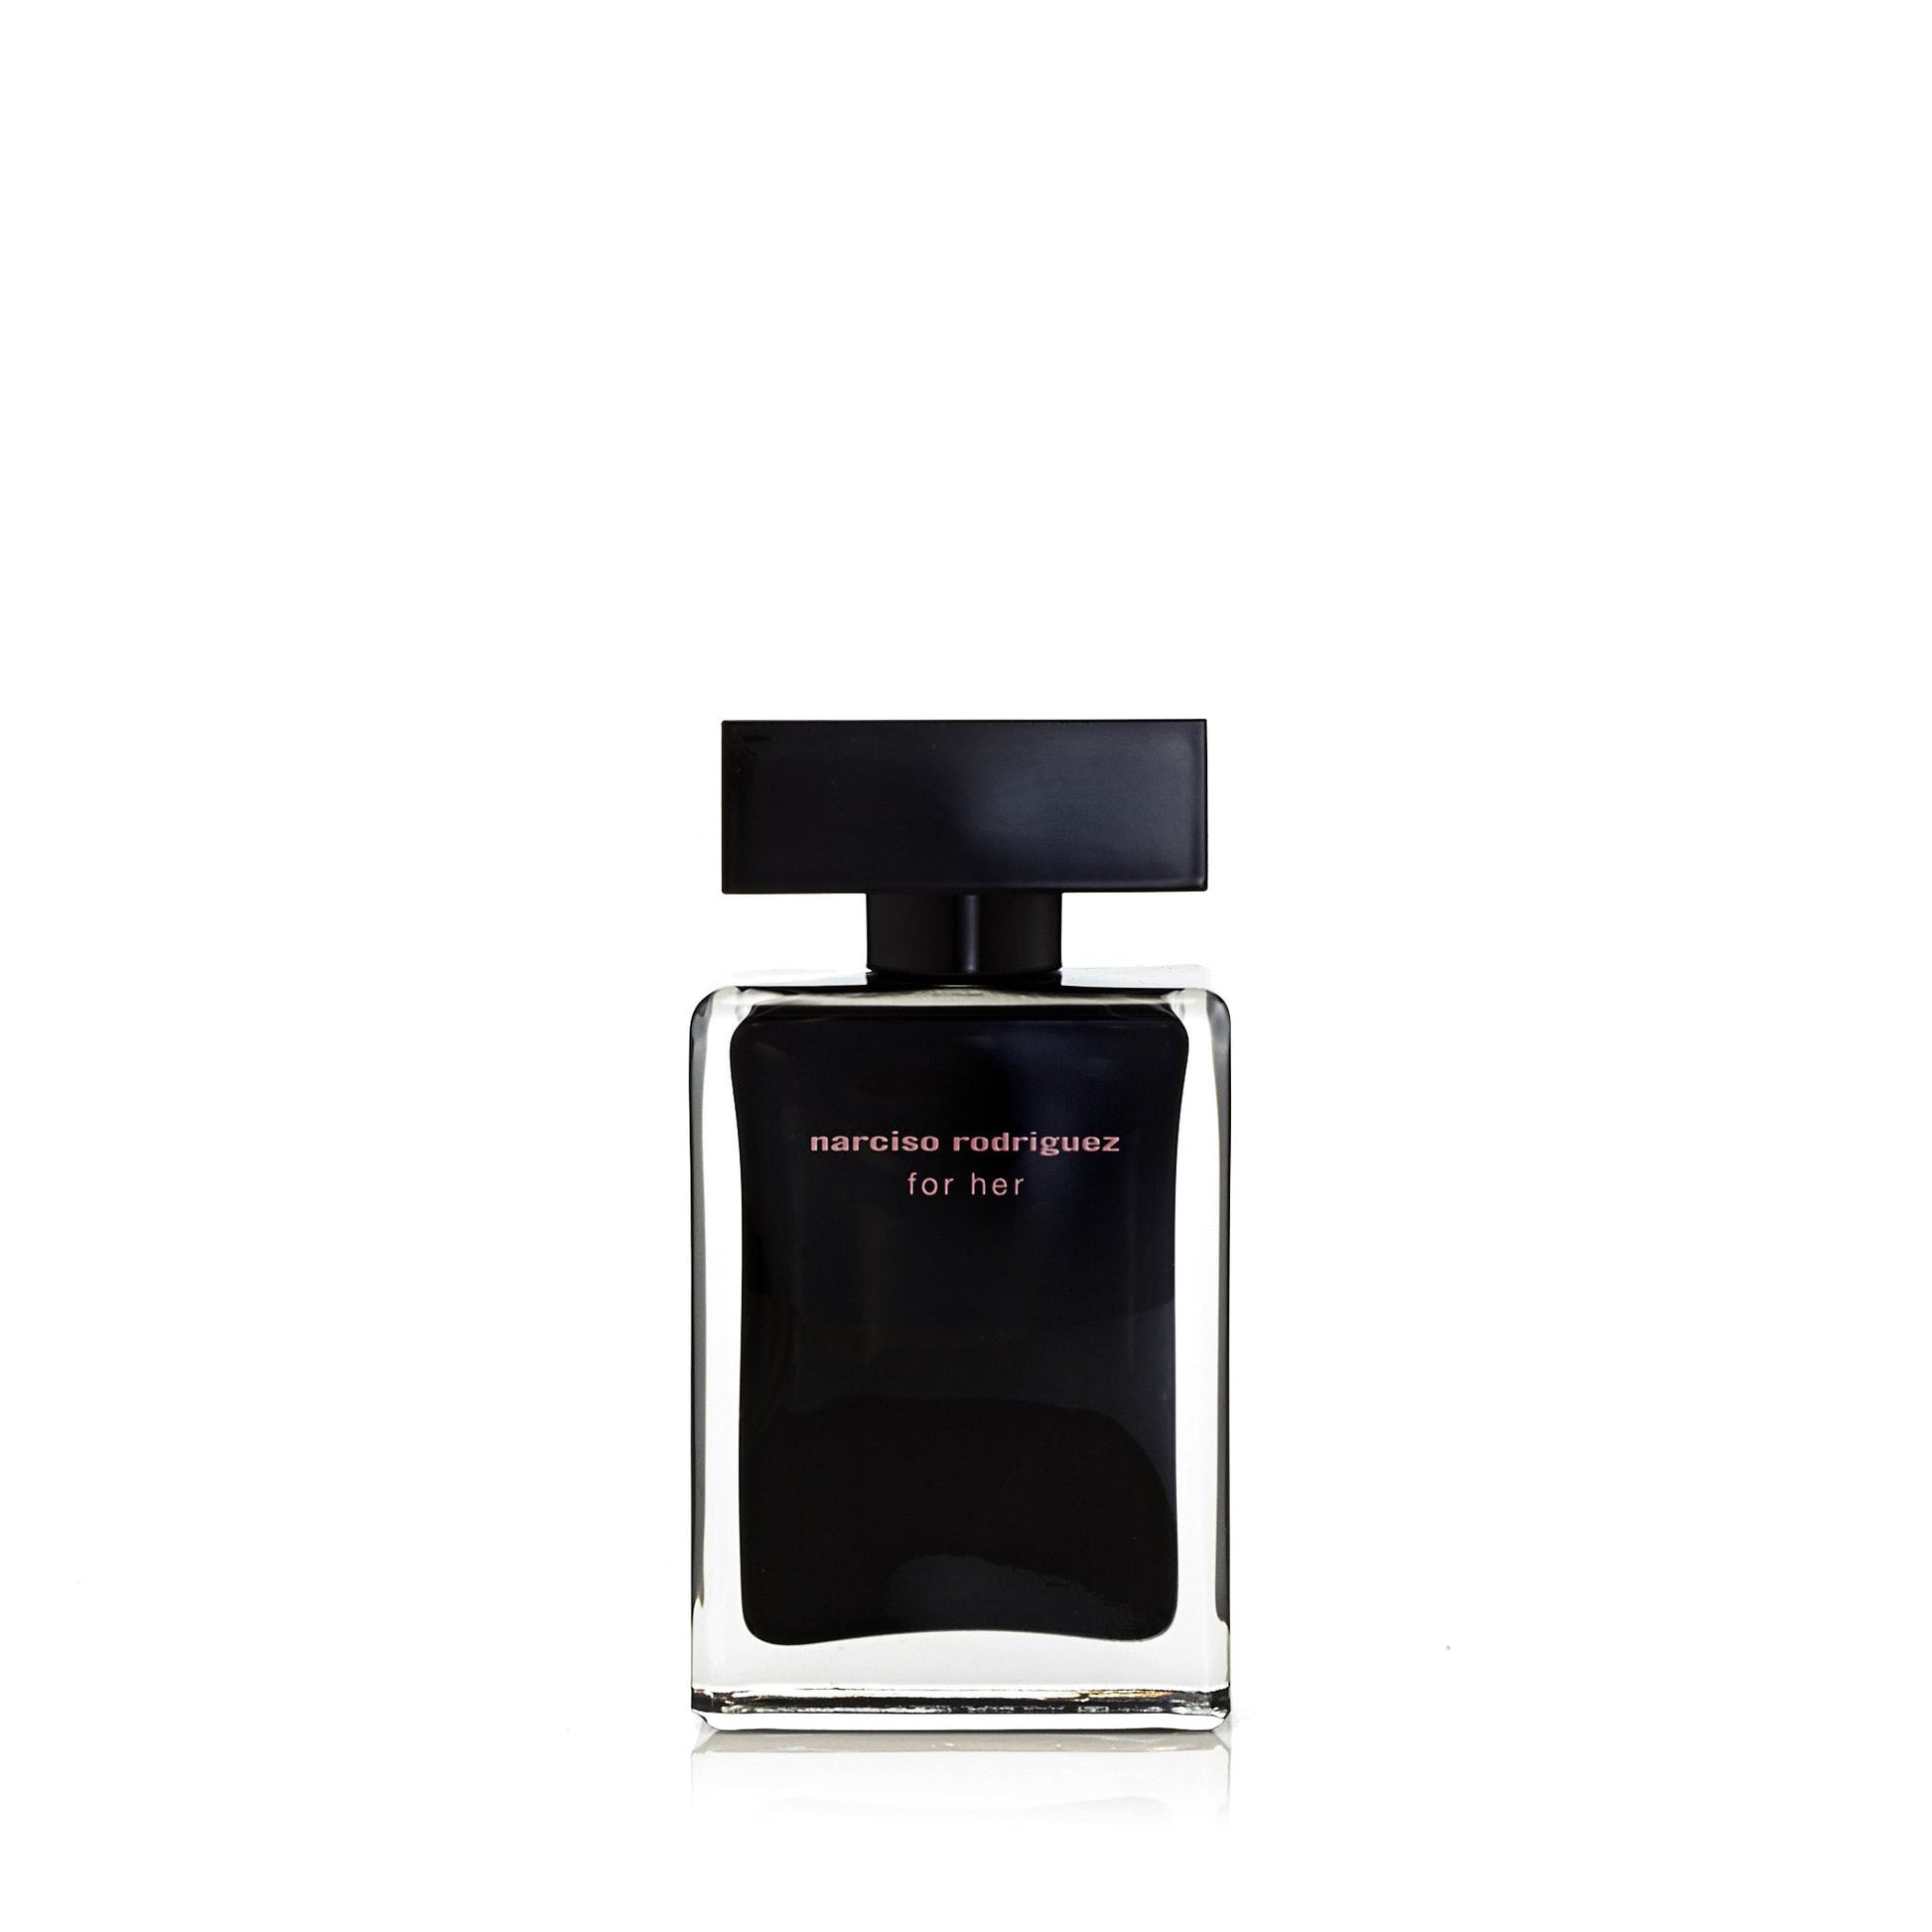 Narciso Rodriguez Eau de Toilette Spray for Women by Narciso Rodriguez, Product image 2